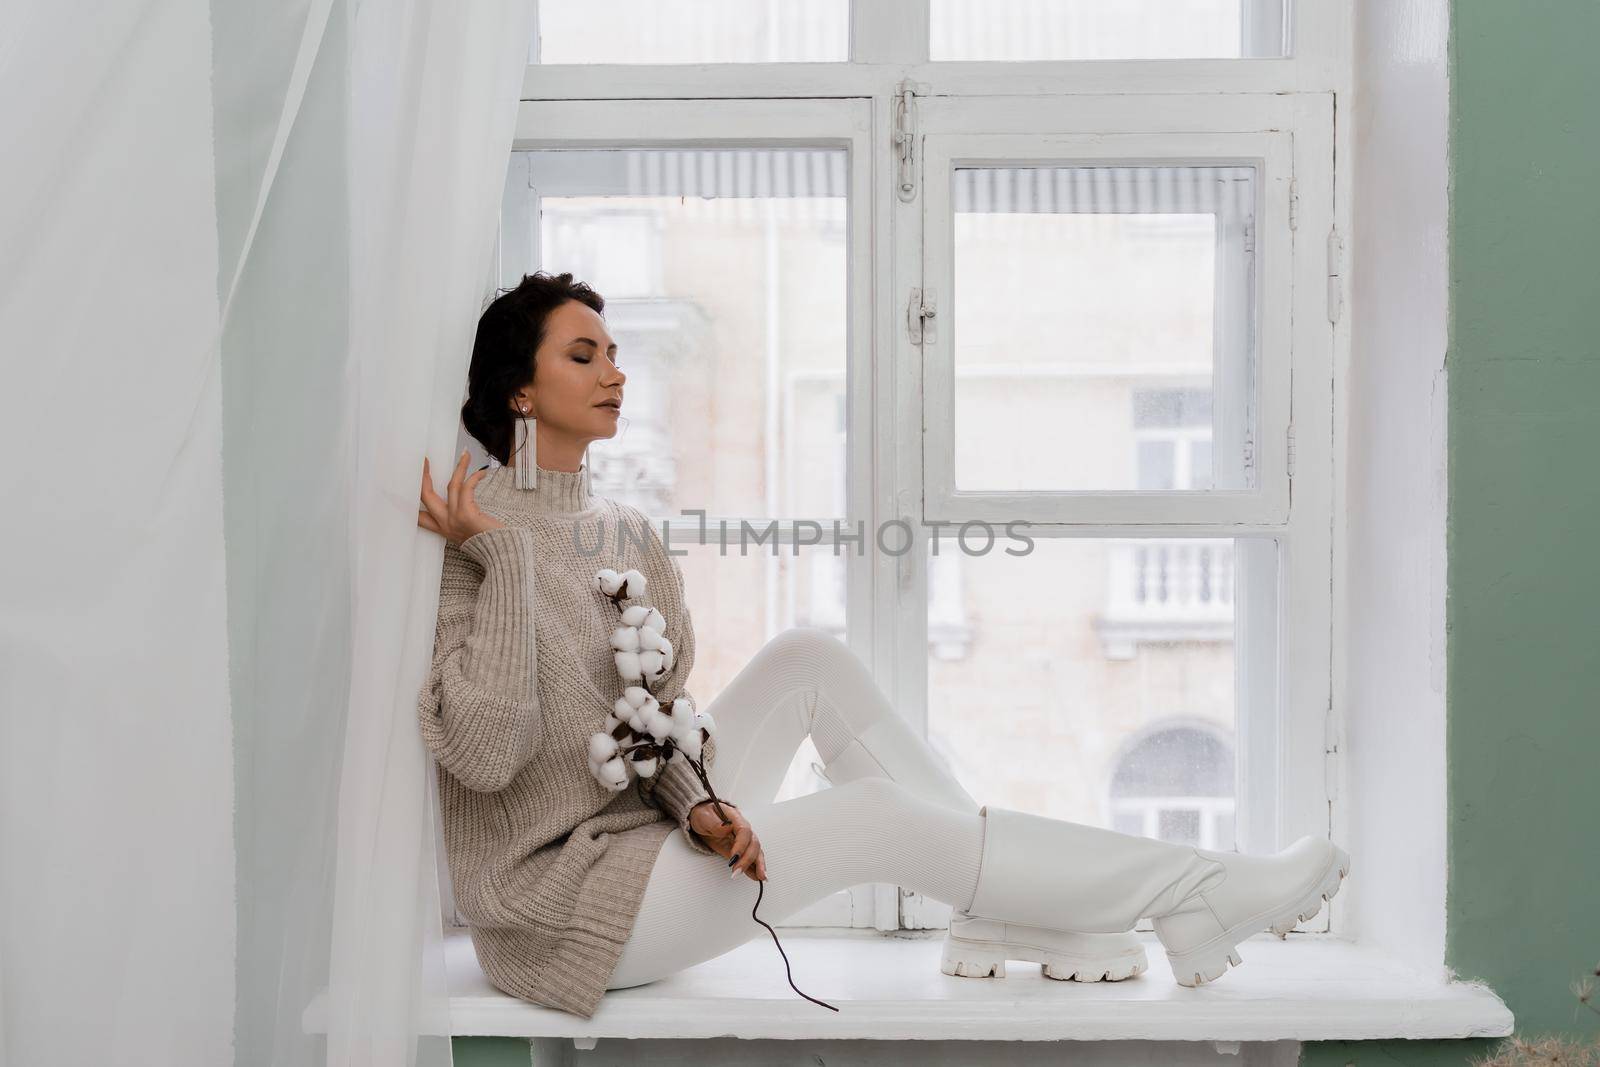 Free time for rest. Profile of a beautiful woman sitting on a white window sill at home, holding a cotton plant in her hands. She is wearing a sweater, leggings and white boots